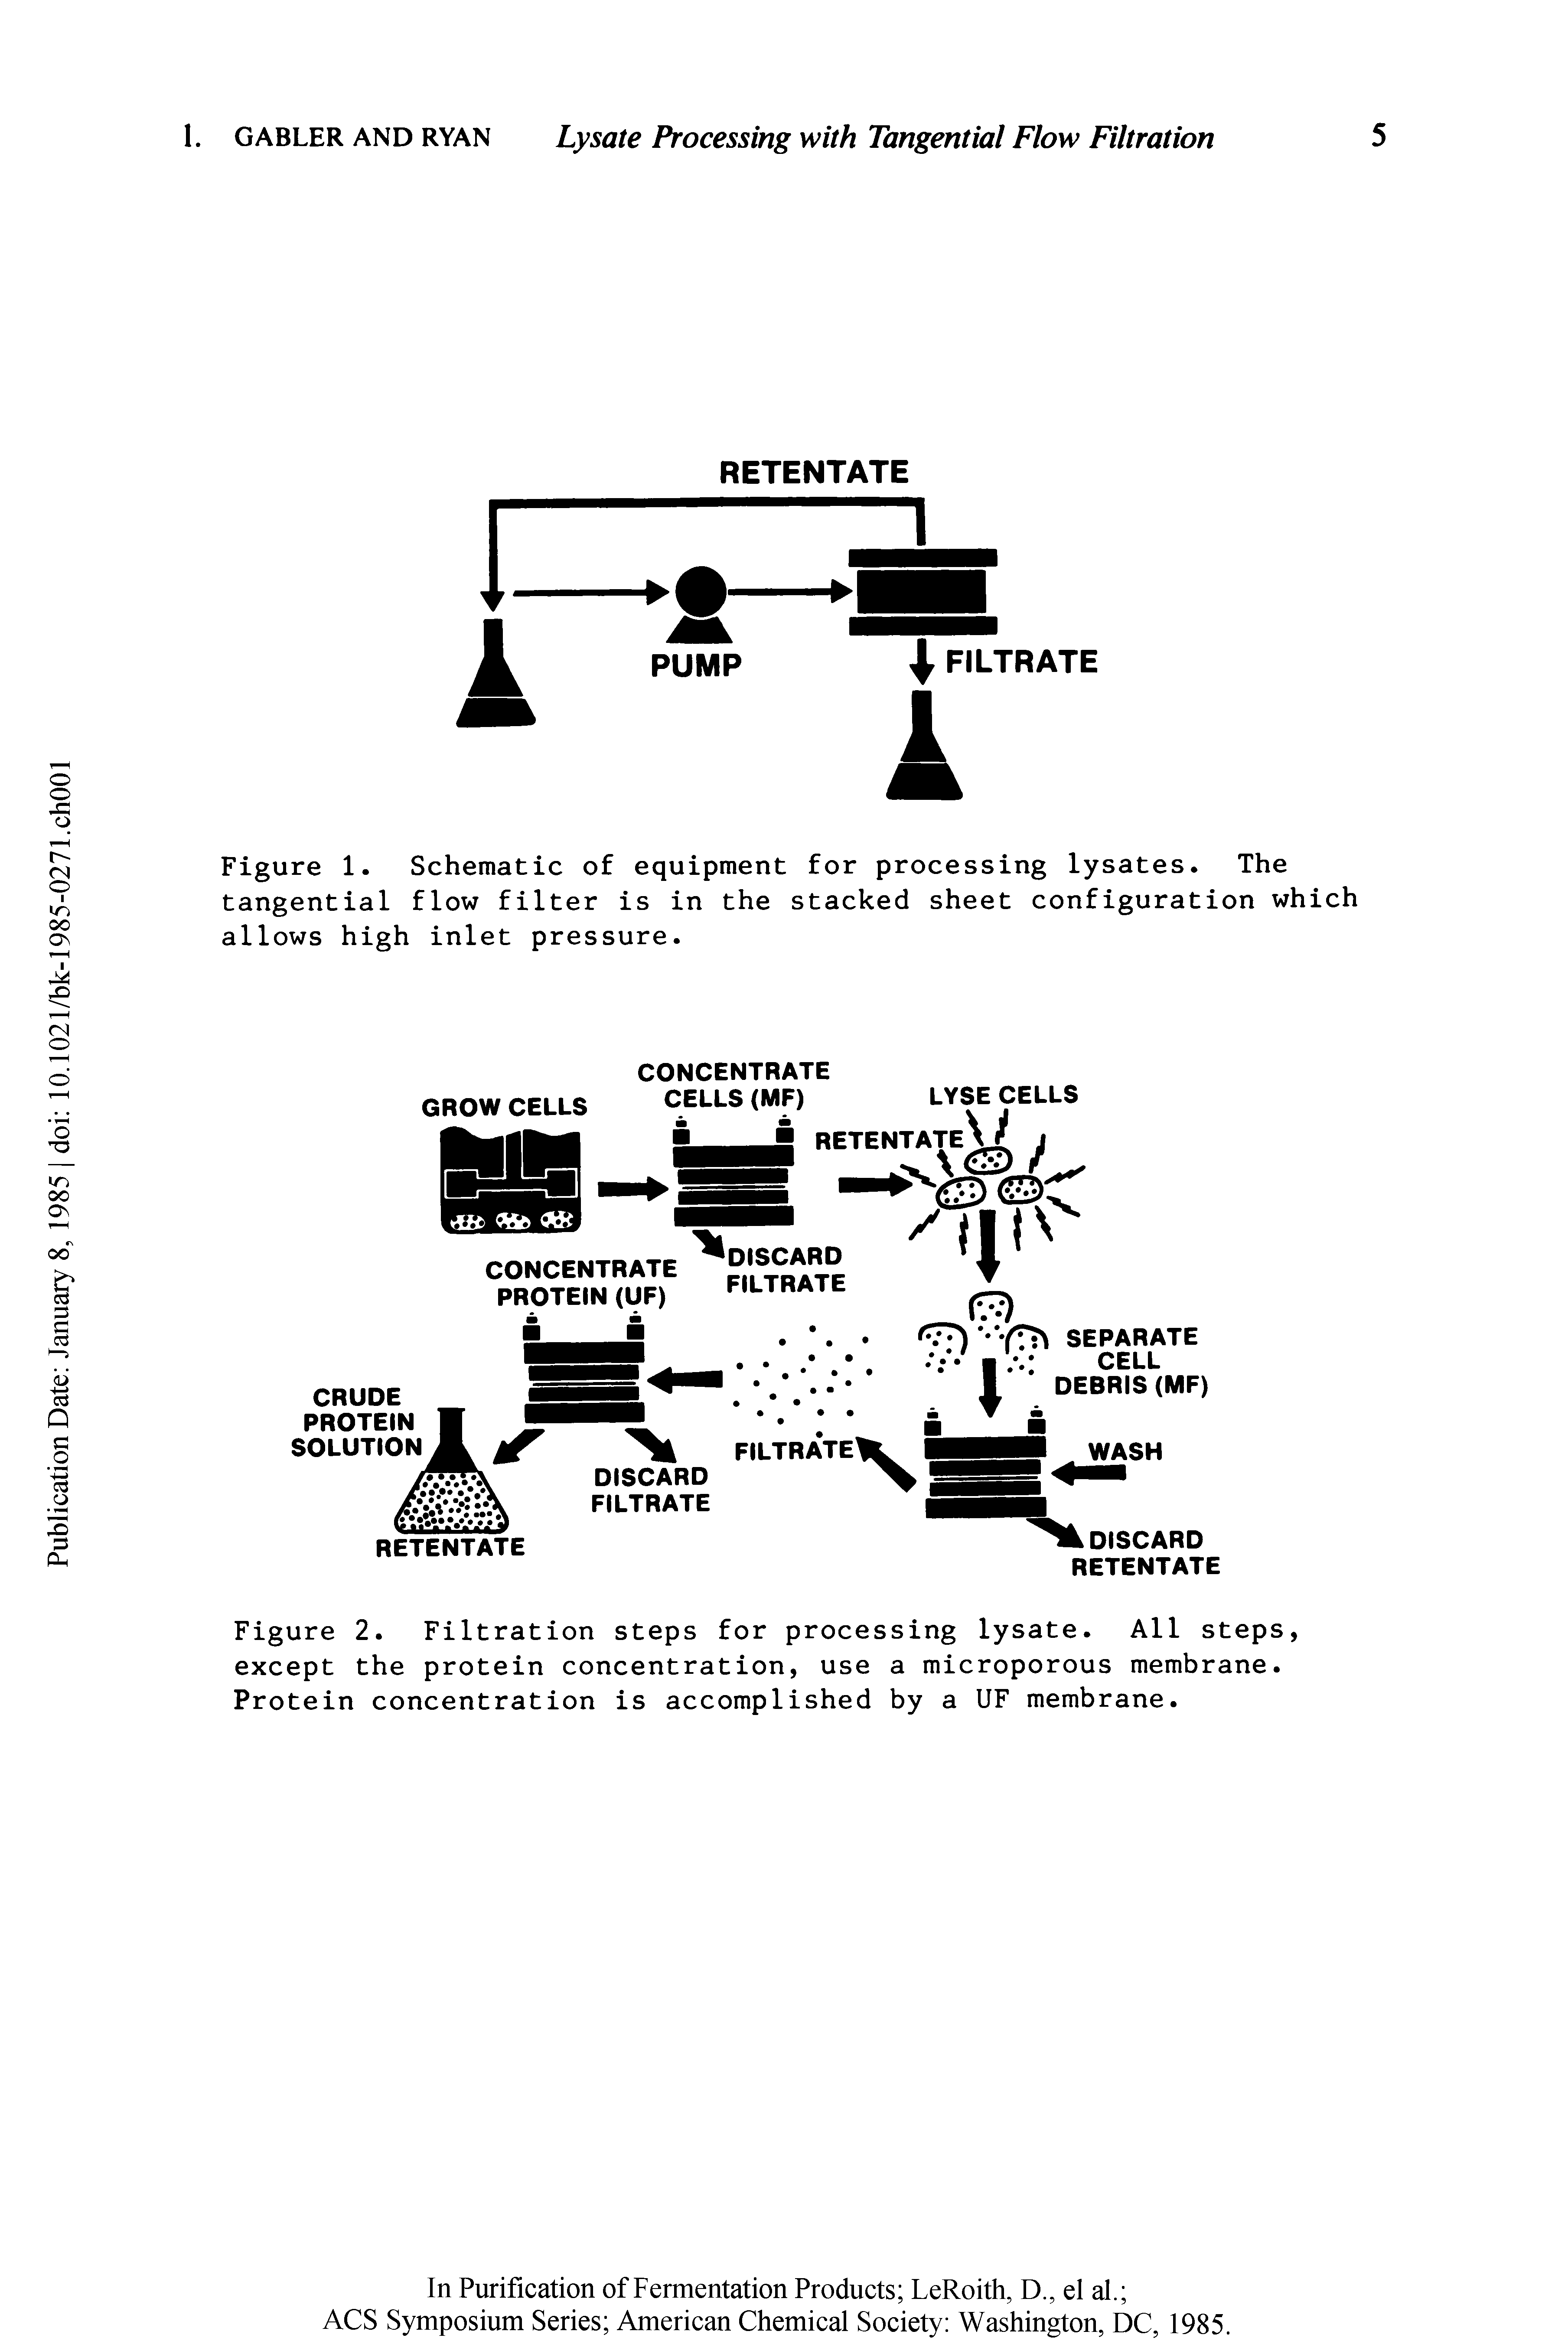 Figure 2. Filtration steps for processing lysate. All steps, except the protein concentration, use a microporous membrane. Protein concentration is accomplished by a UF membrane.